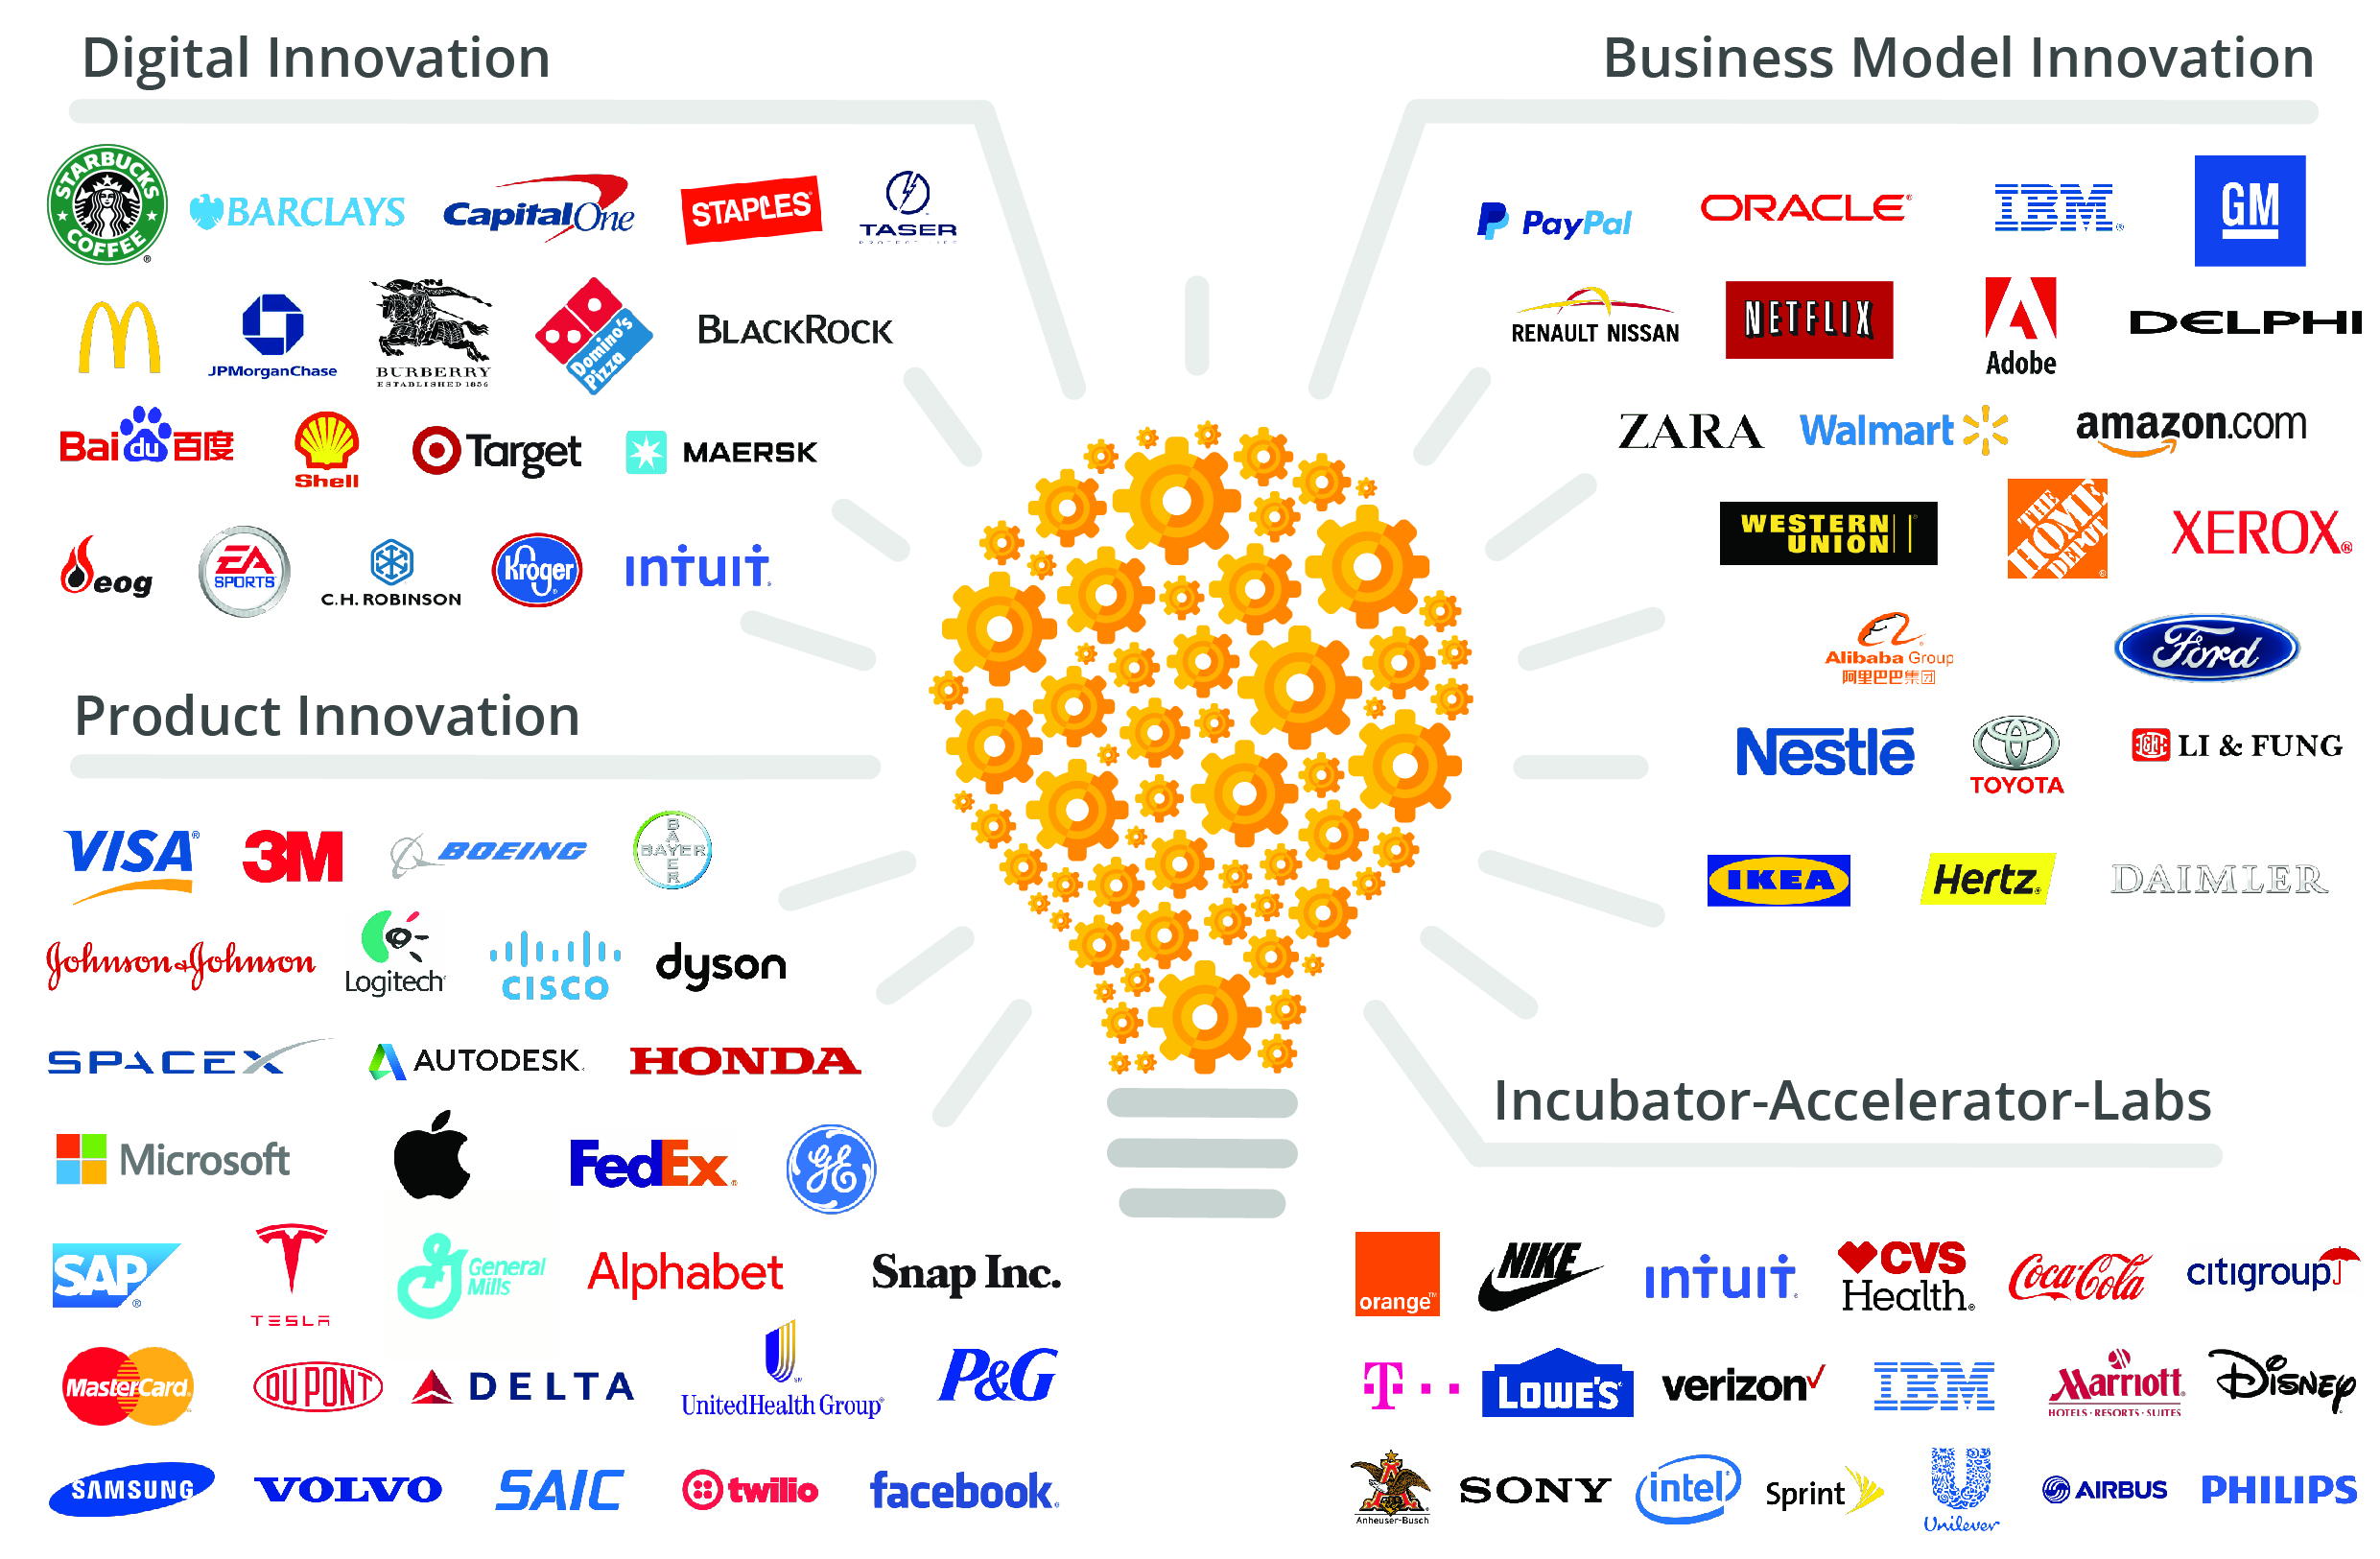 Global Innovation Trends: How corporations are responding